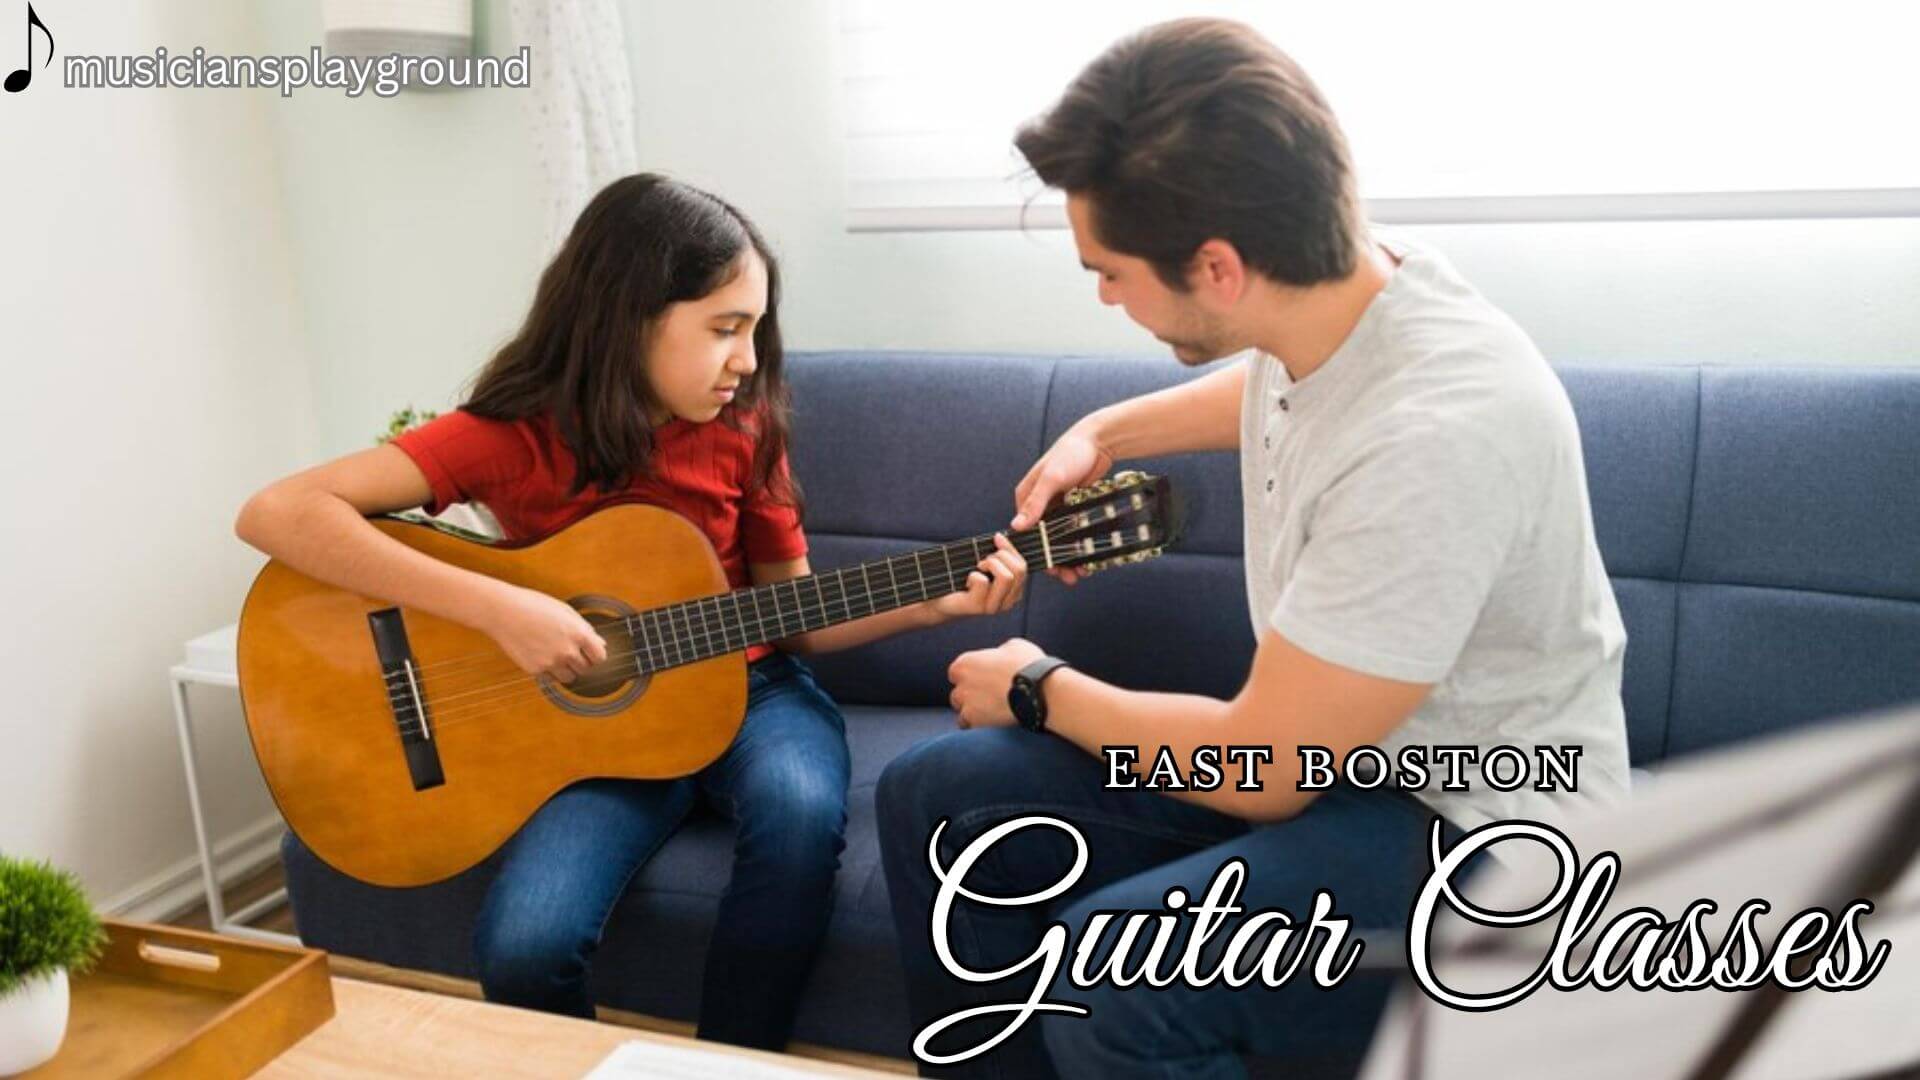 Welcome to Guitar Classes in East Boston, Massachusetts